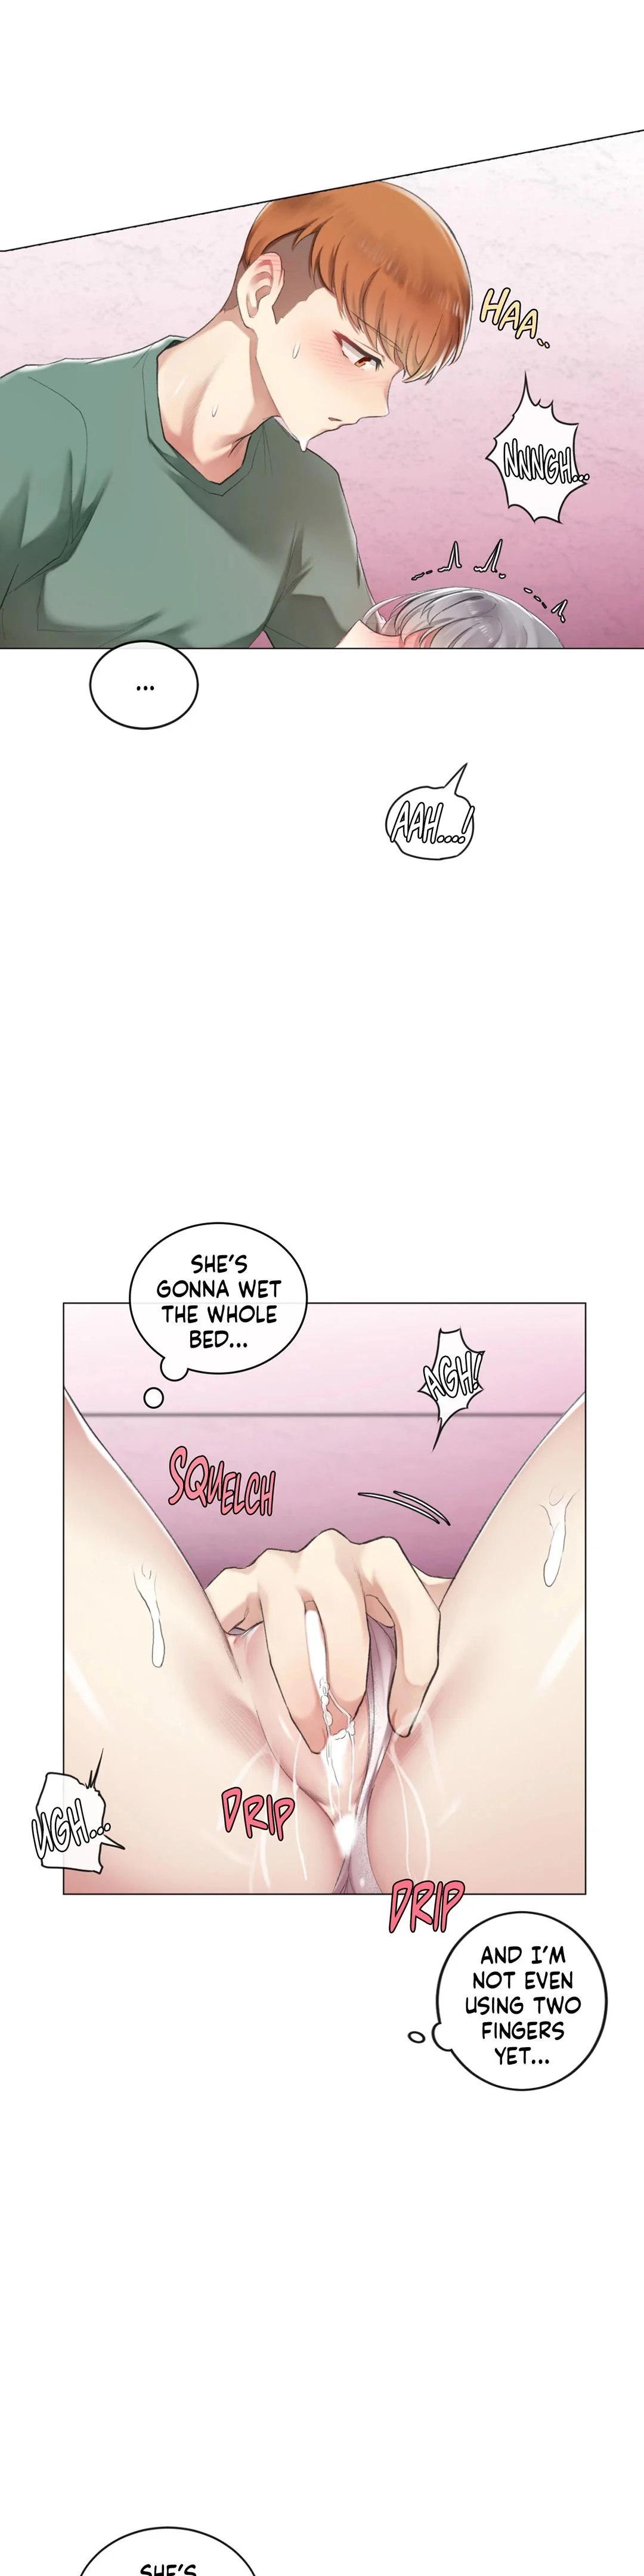 [Dumangoon, KONG_] Sexcape Room: Snap Off Ch.7/7 [English] [Manhwa PDF] Completed 84